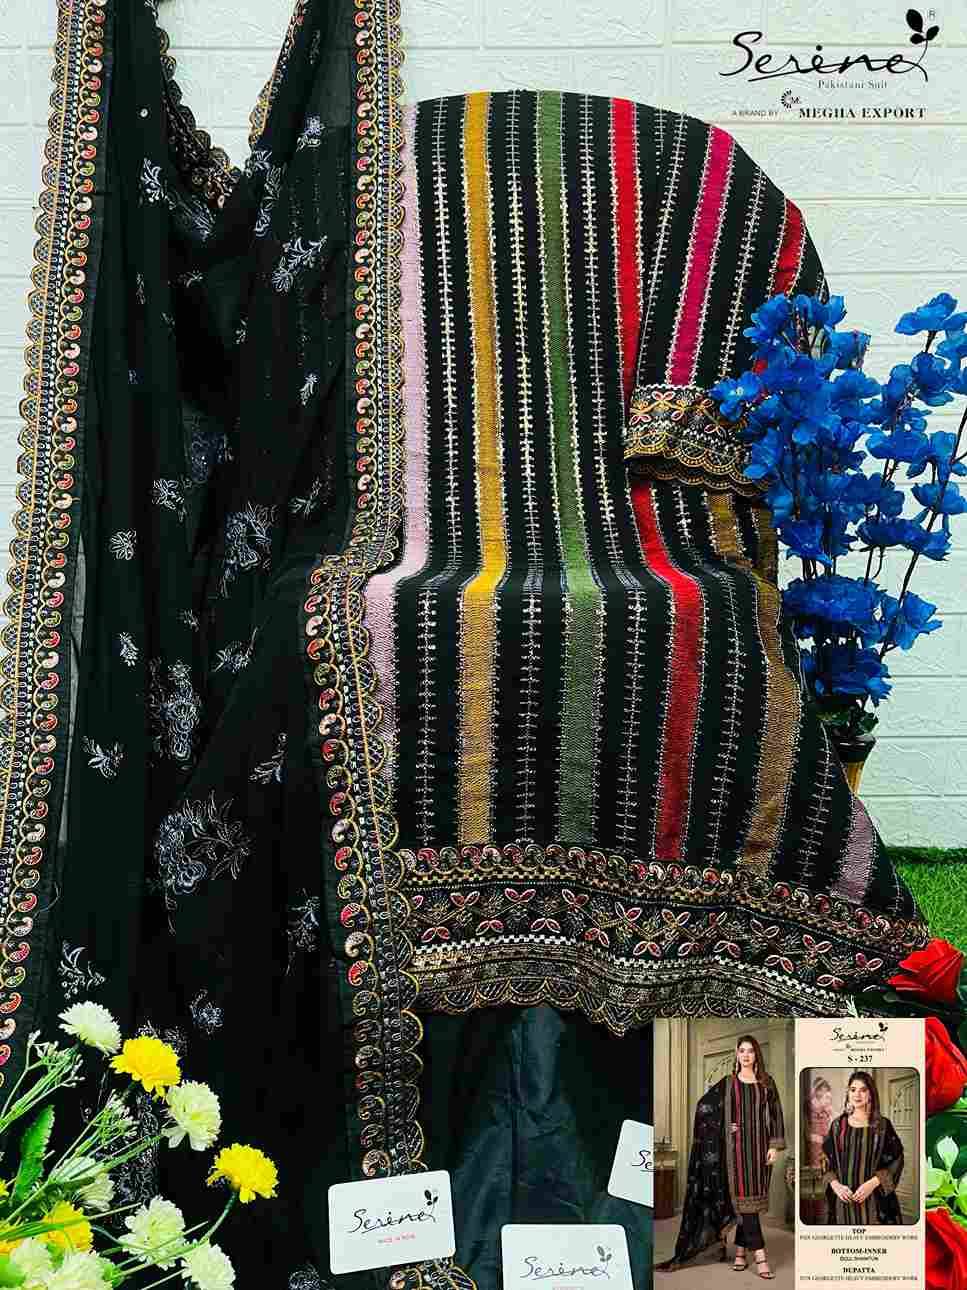 Serene Hit Design S-237 By Serene Designer Pakistani Suits Beautiful Fancy Colorful Stylish Party Wear & Occasional Wear Faux Georgette Embroidered Dresses At Wholesale Price